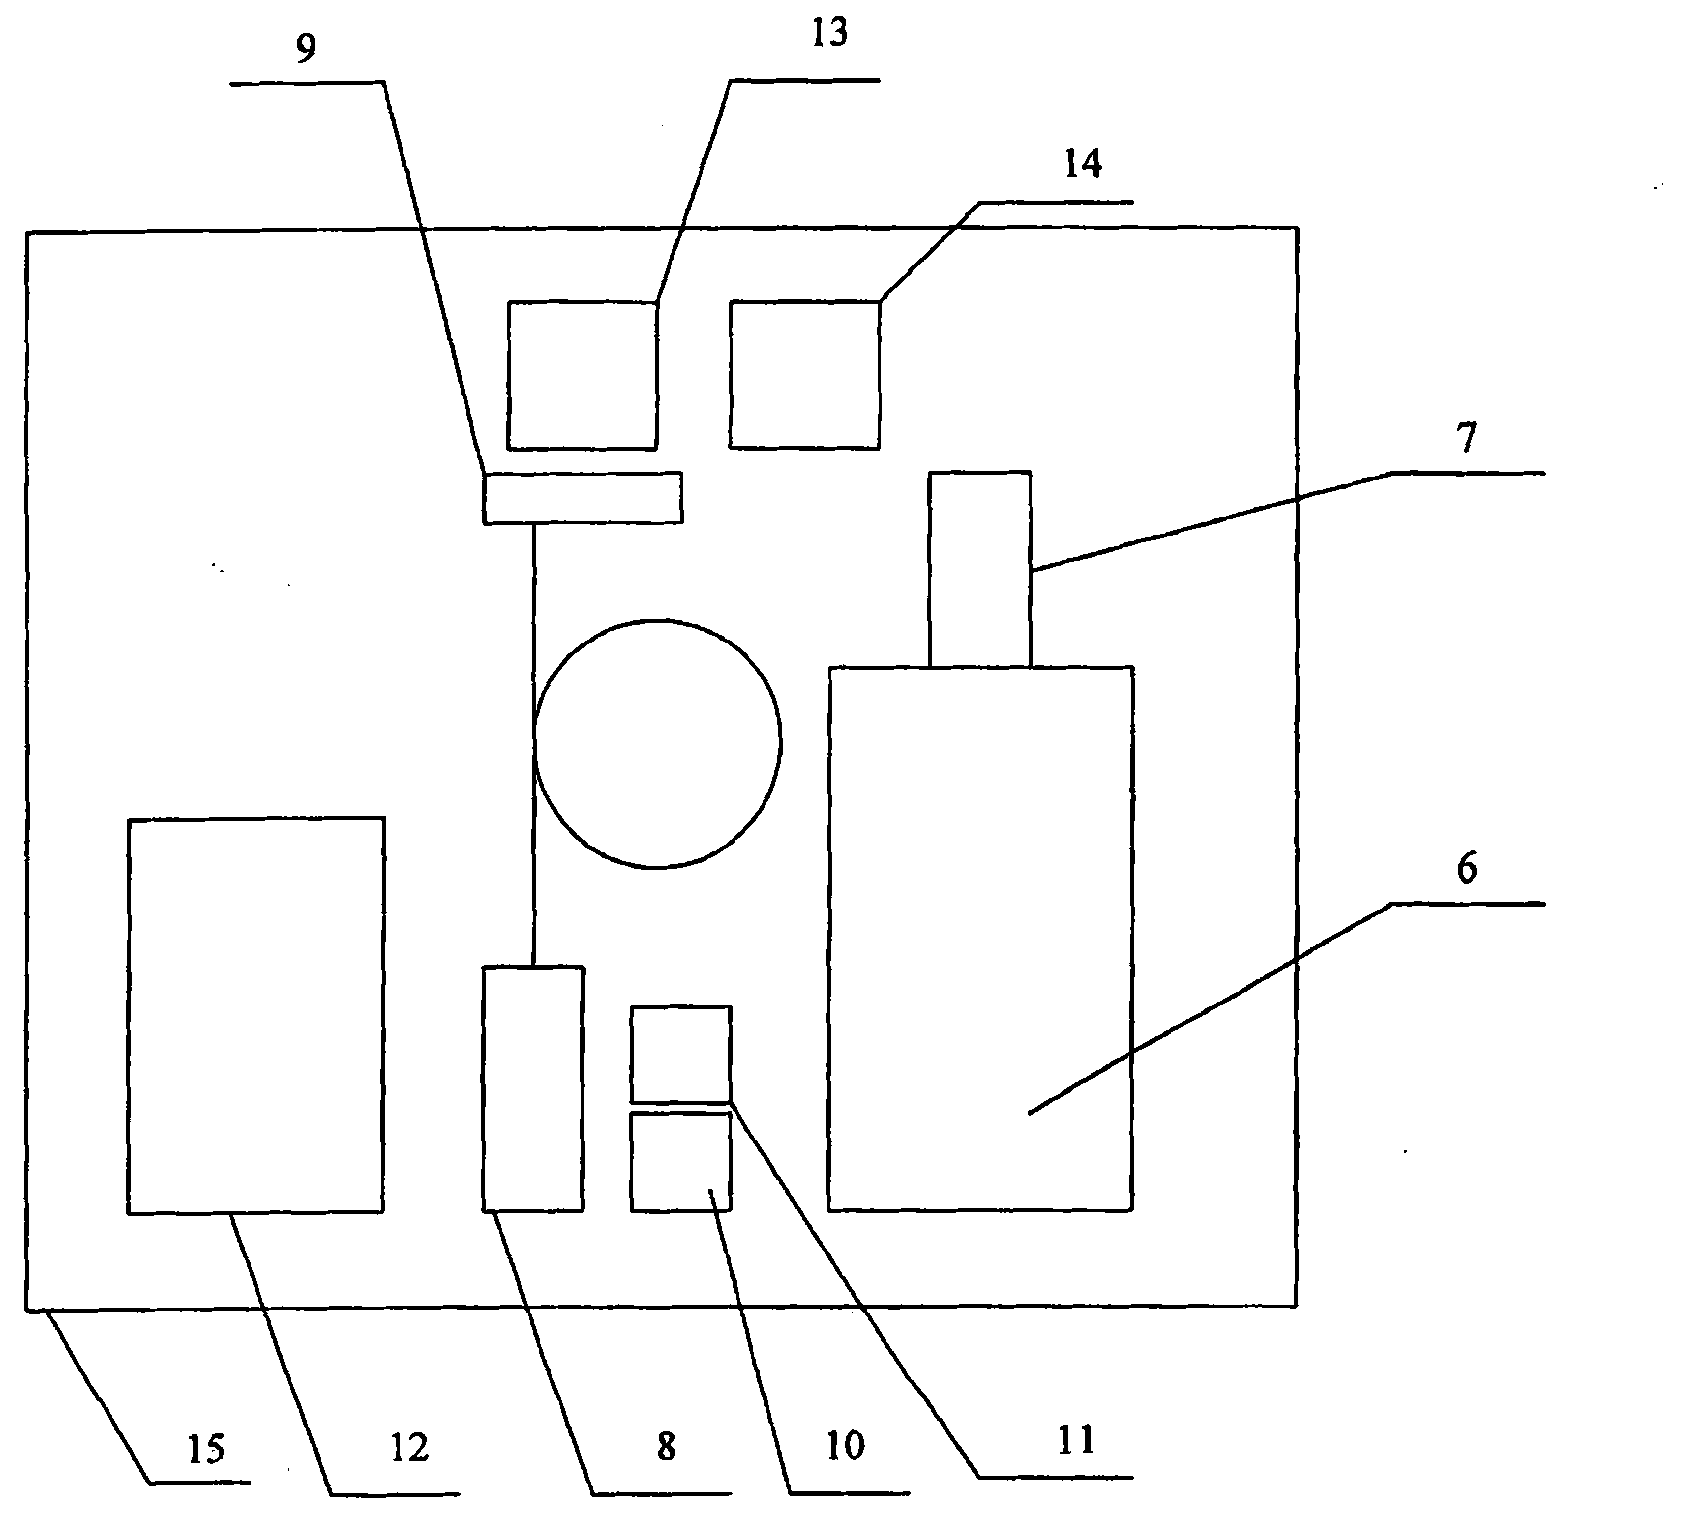 Anti-sniper laser active detection system and method